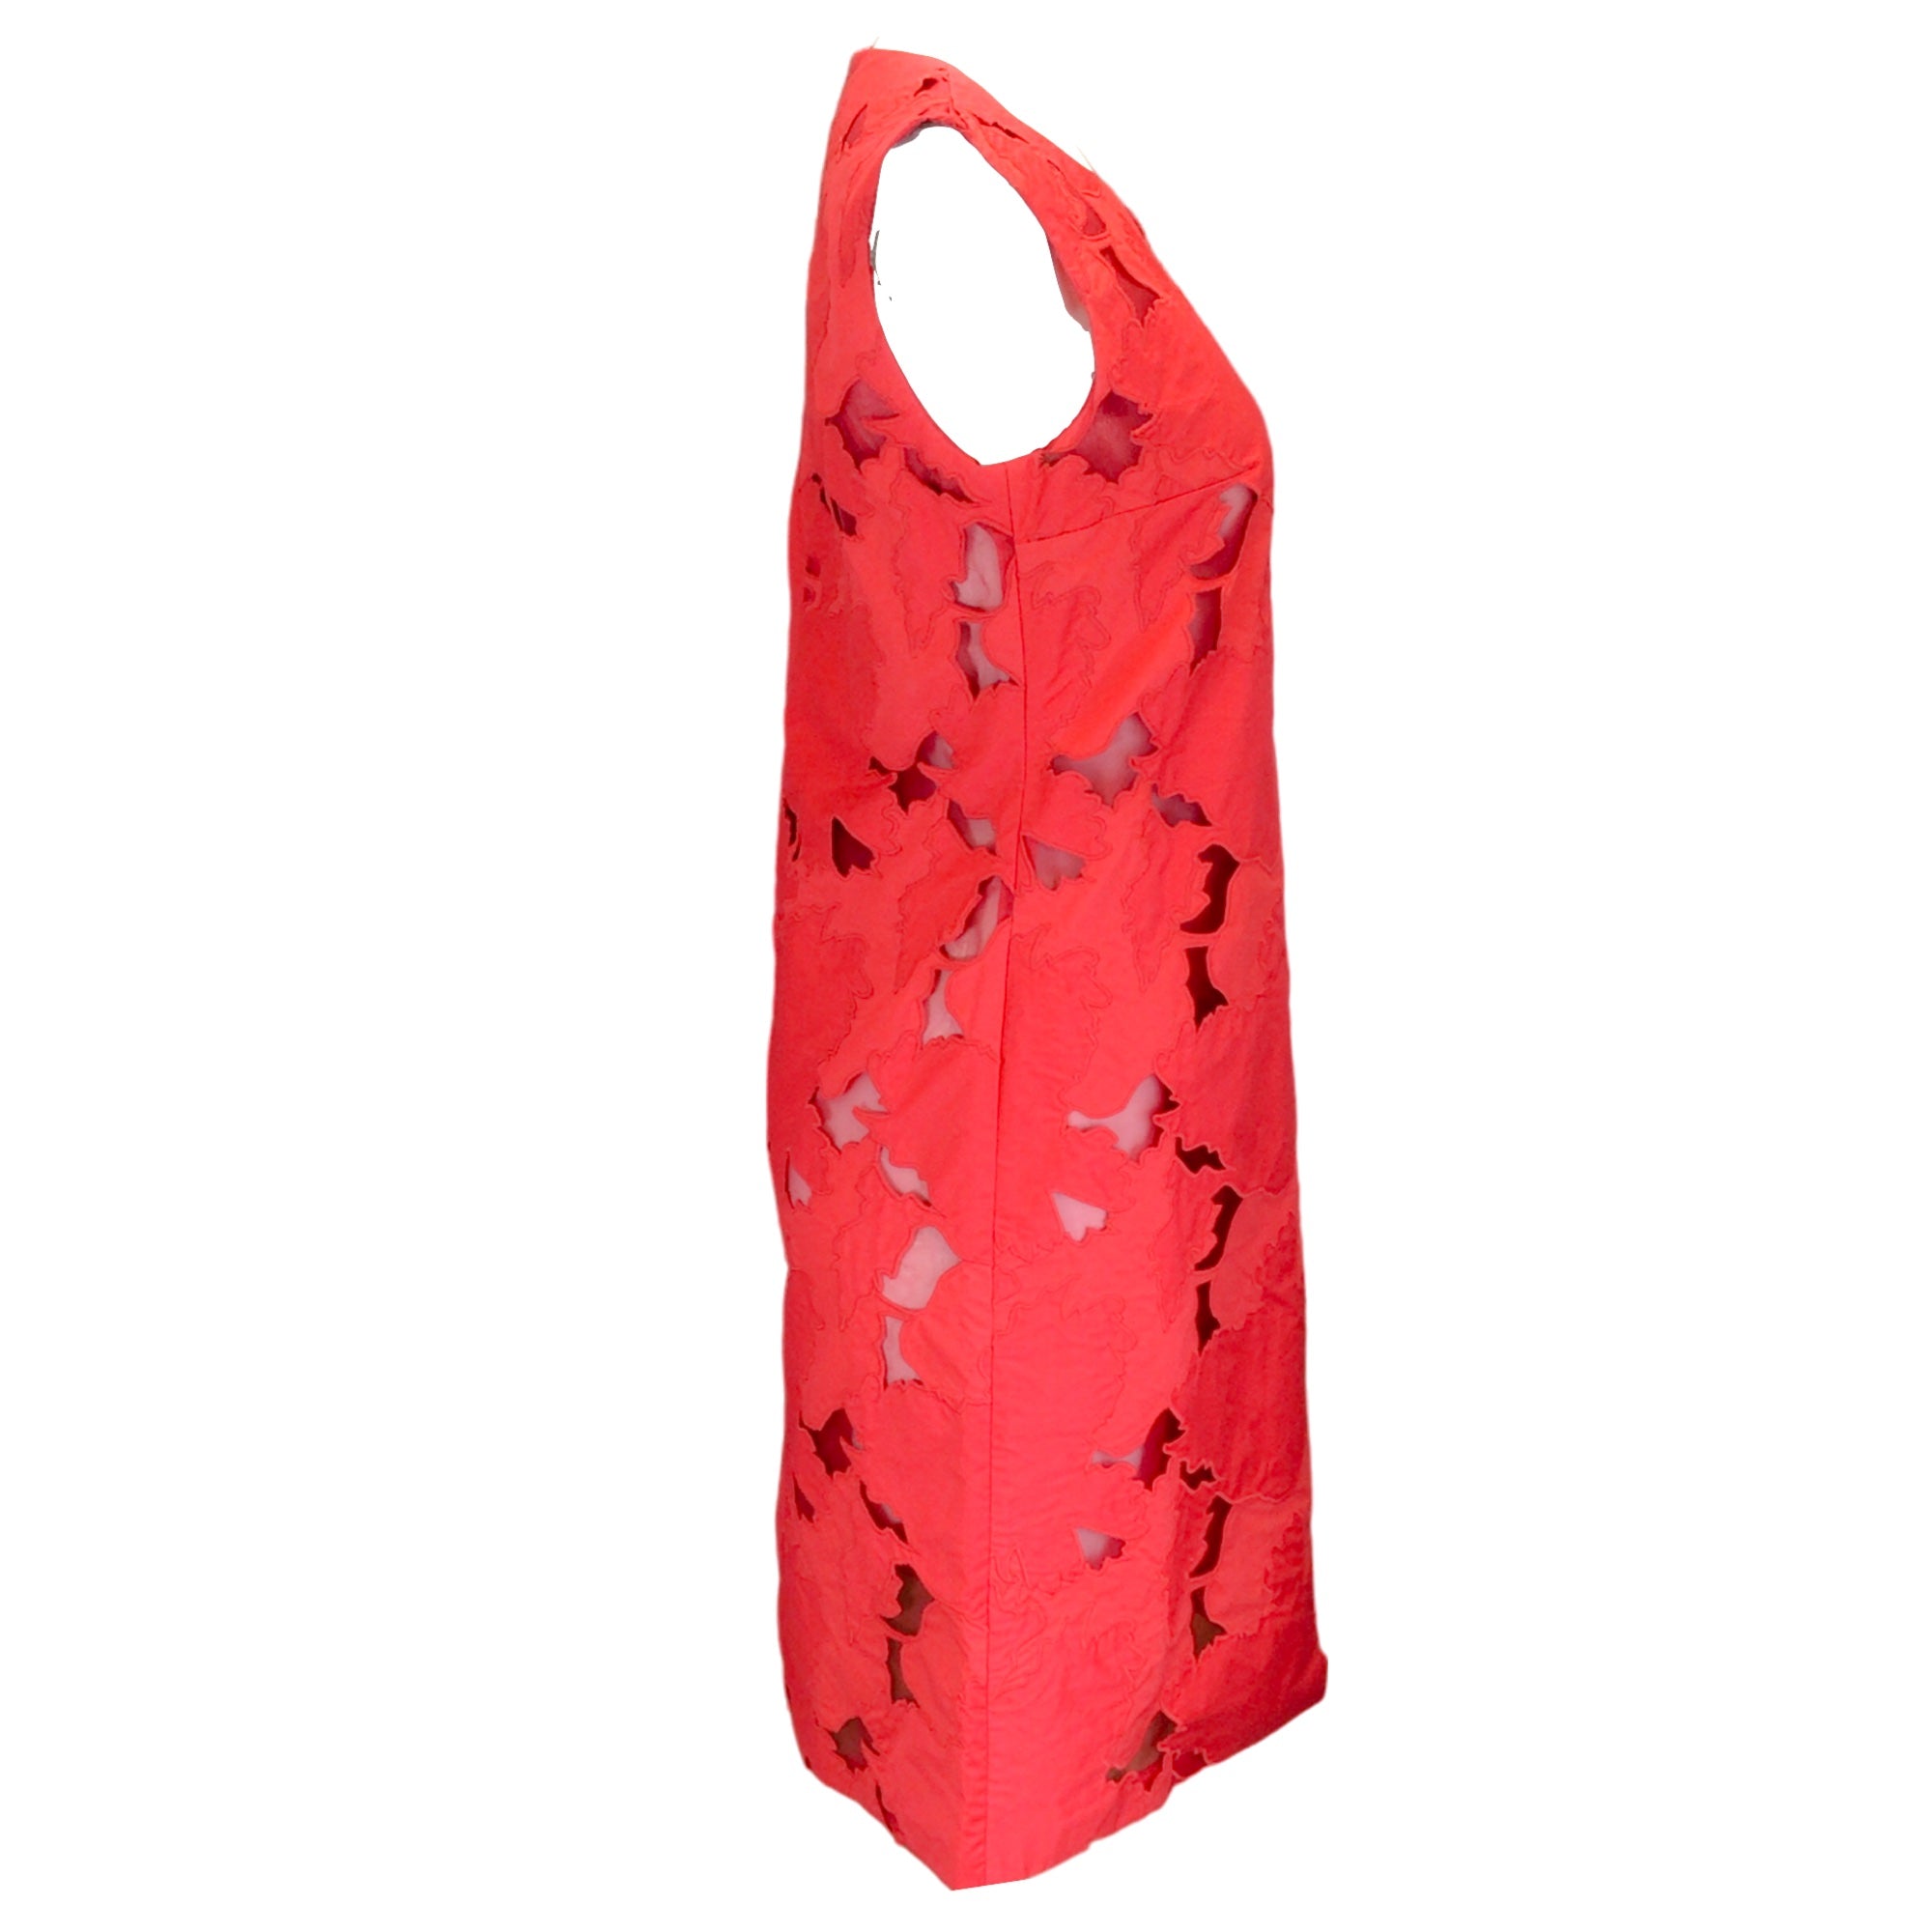 Loring Red Cut-Out Detail Sleeveless Cotton Dress